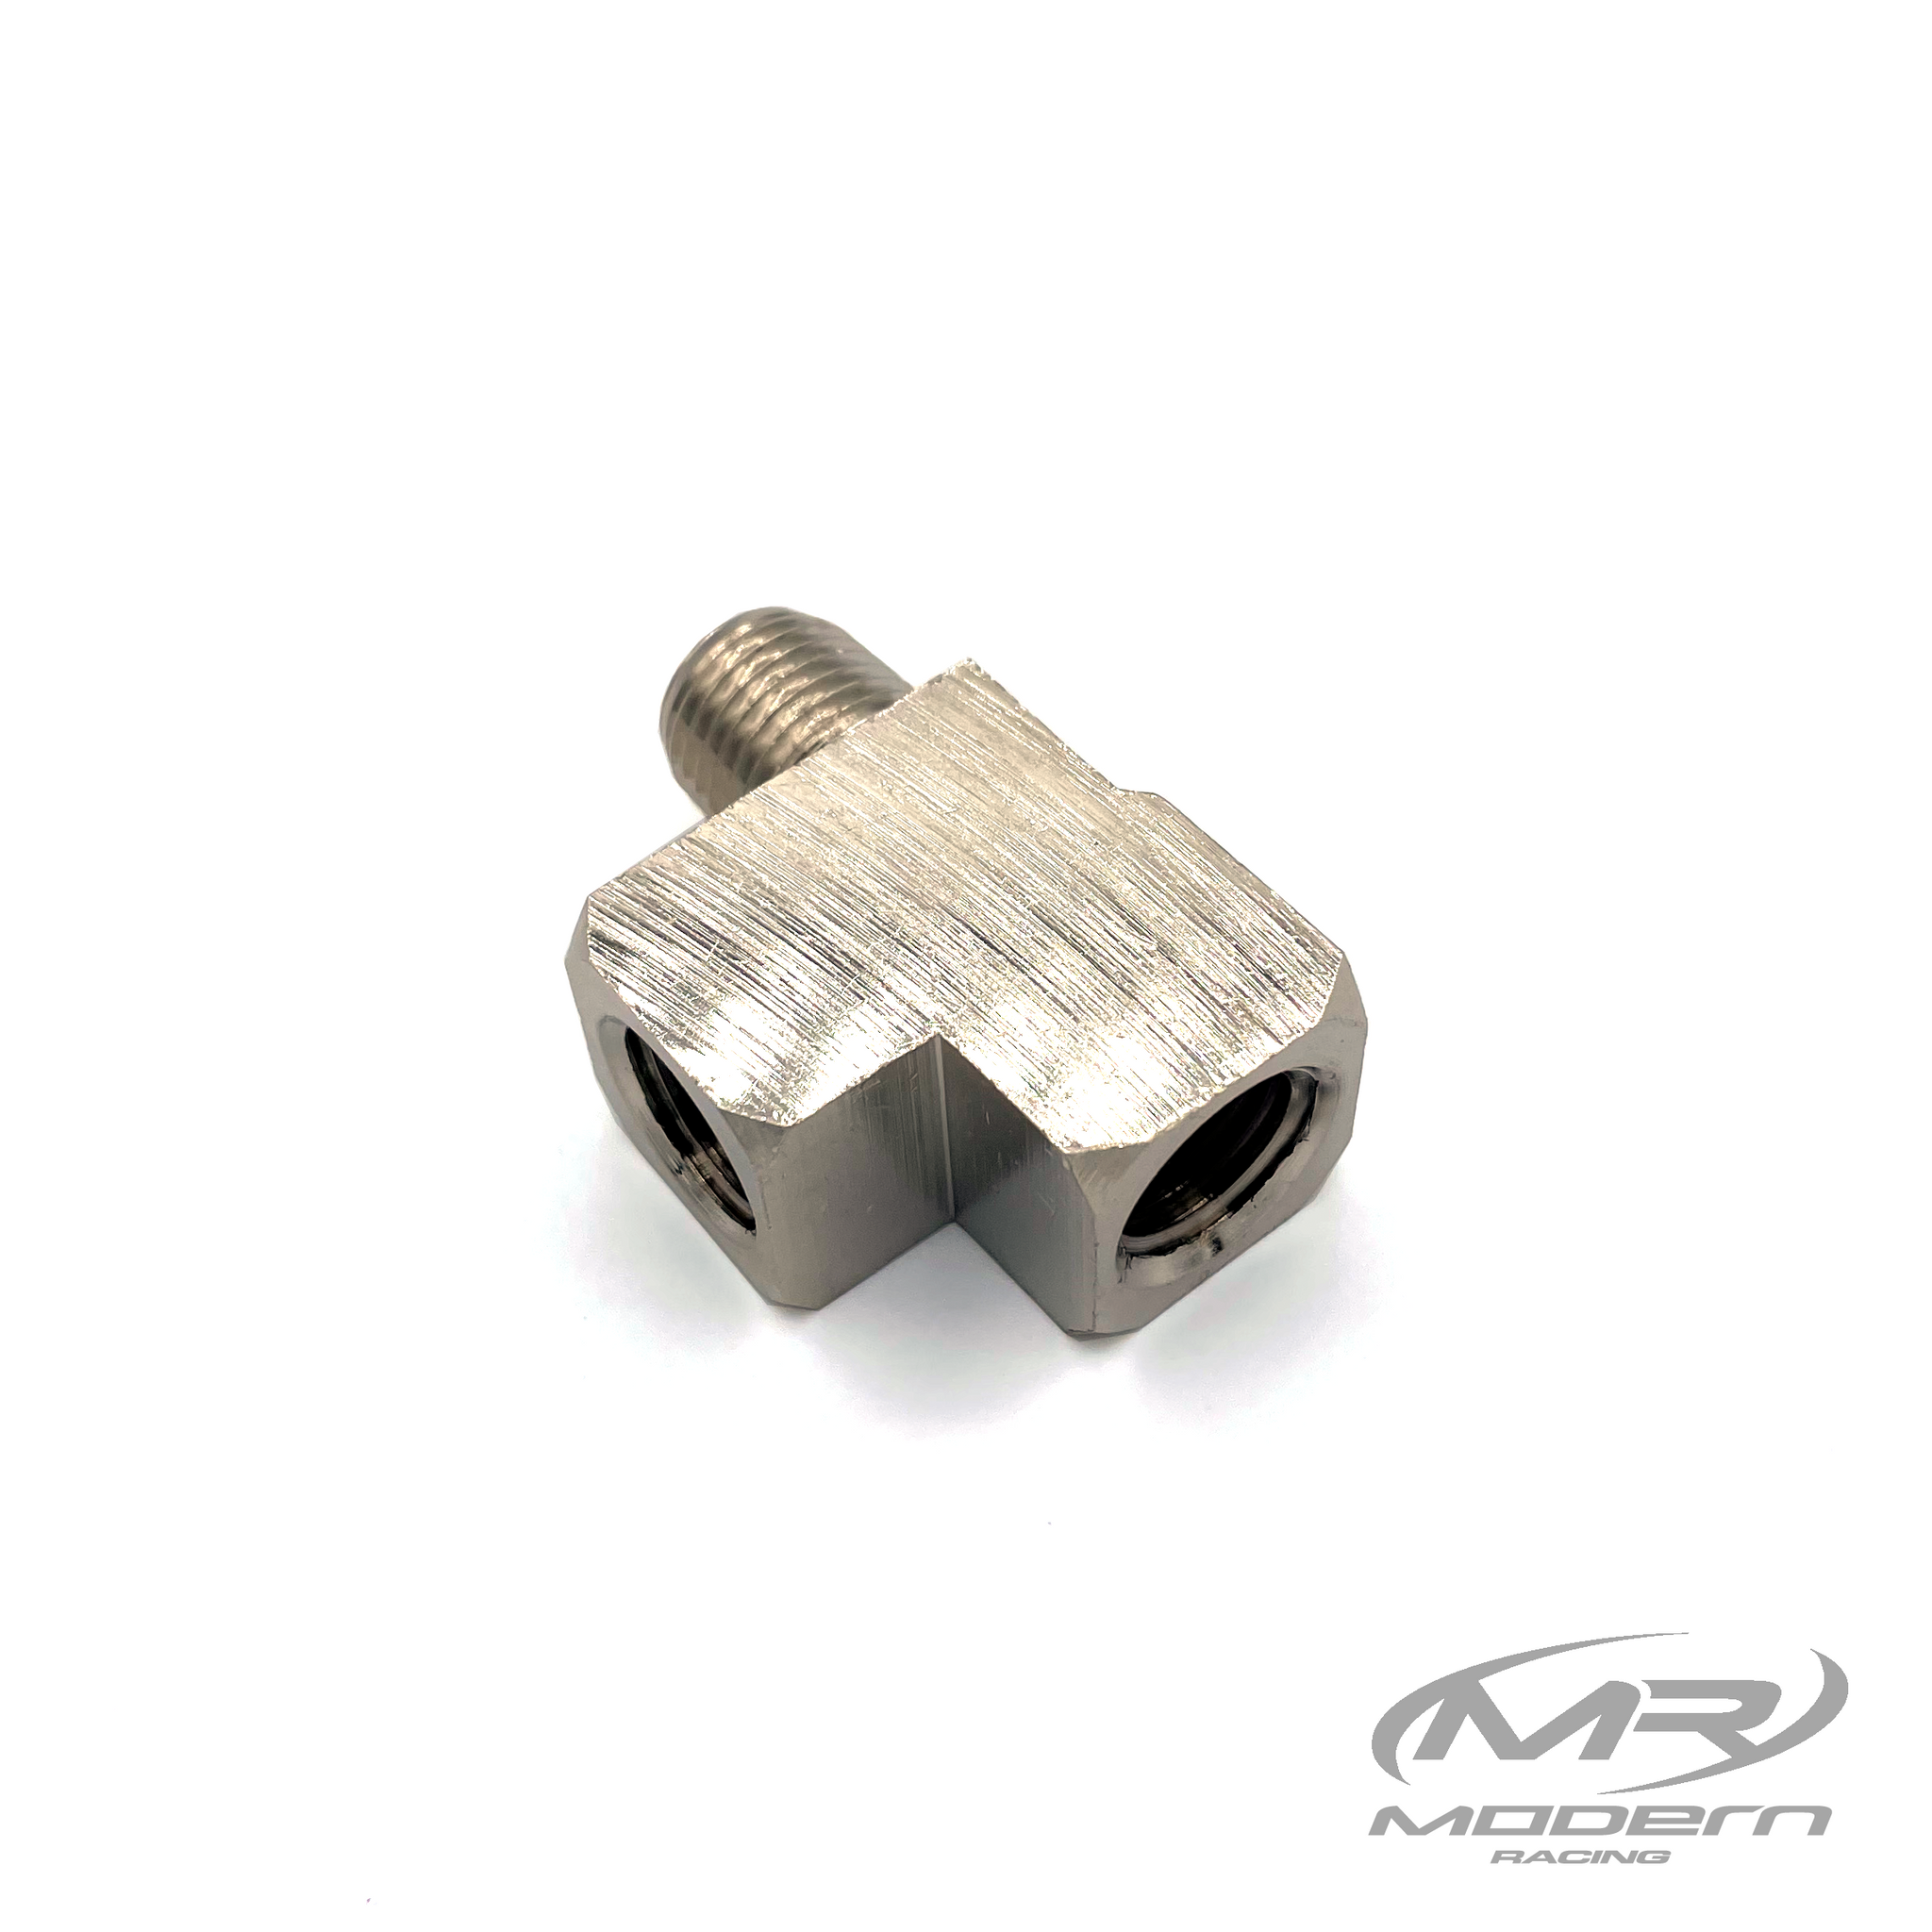 1/4" NPT Female To 1/4" NPT Male Right Angle T Fitting Brass (Nickel Plated)